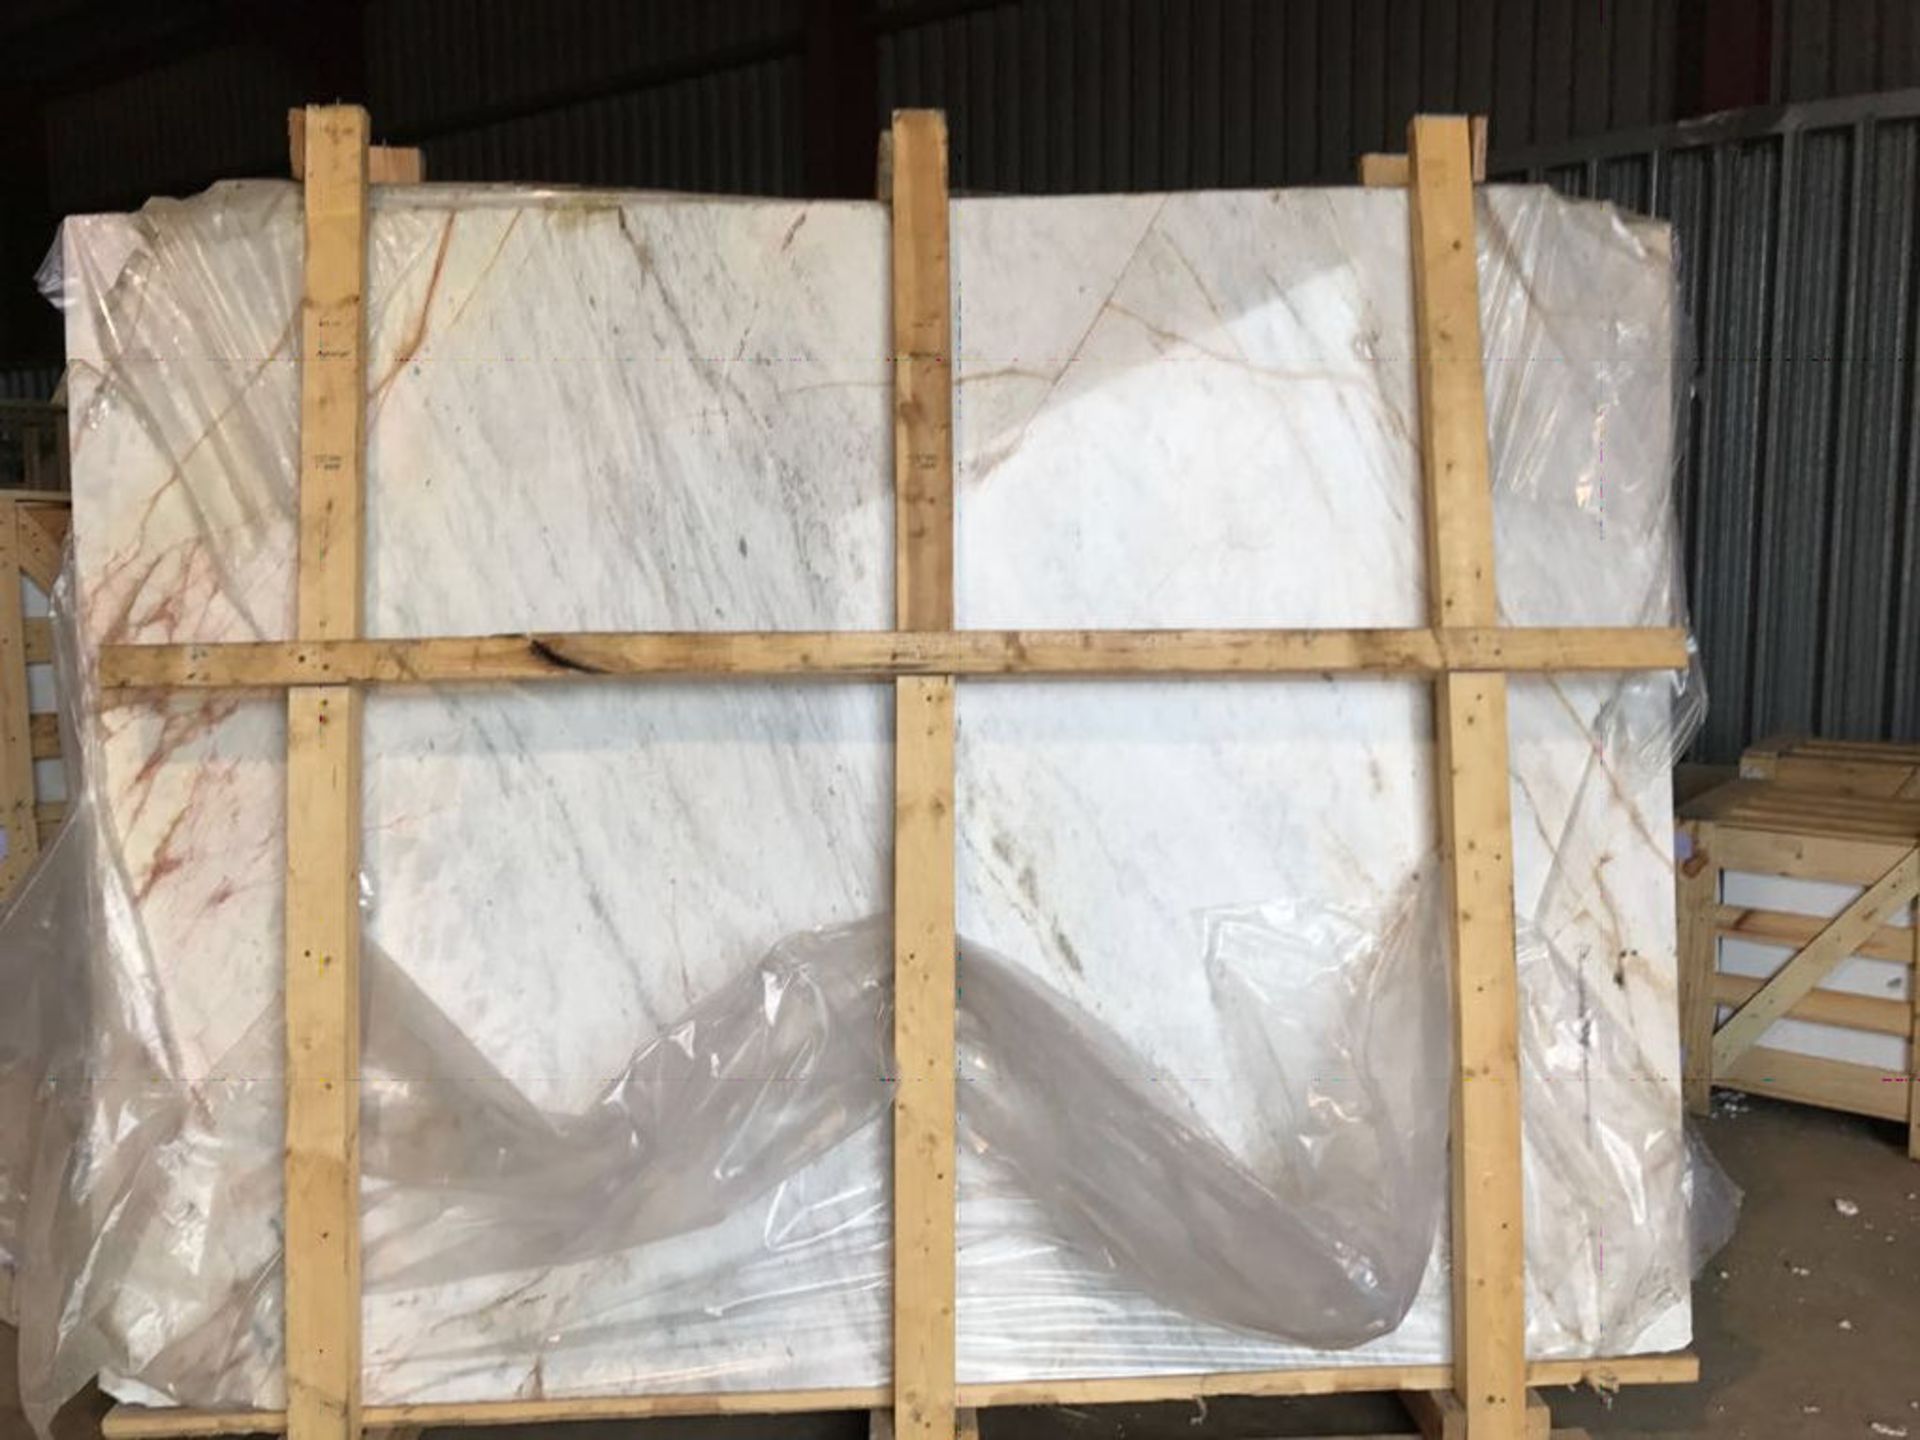 3 x Calacatta Marble Sheets - Approx. 2.5 x 1.5m Each - 20mm Thick - CL312 - Location: - Image 5 of 5